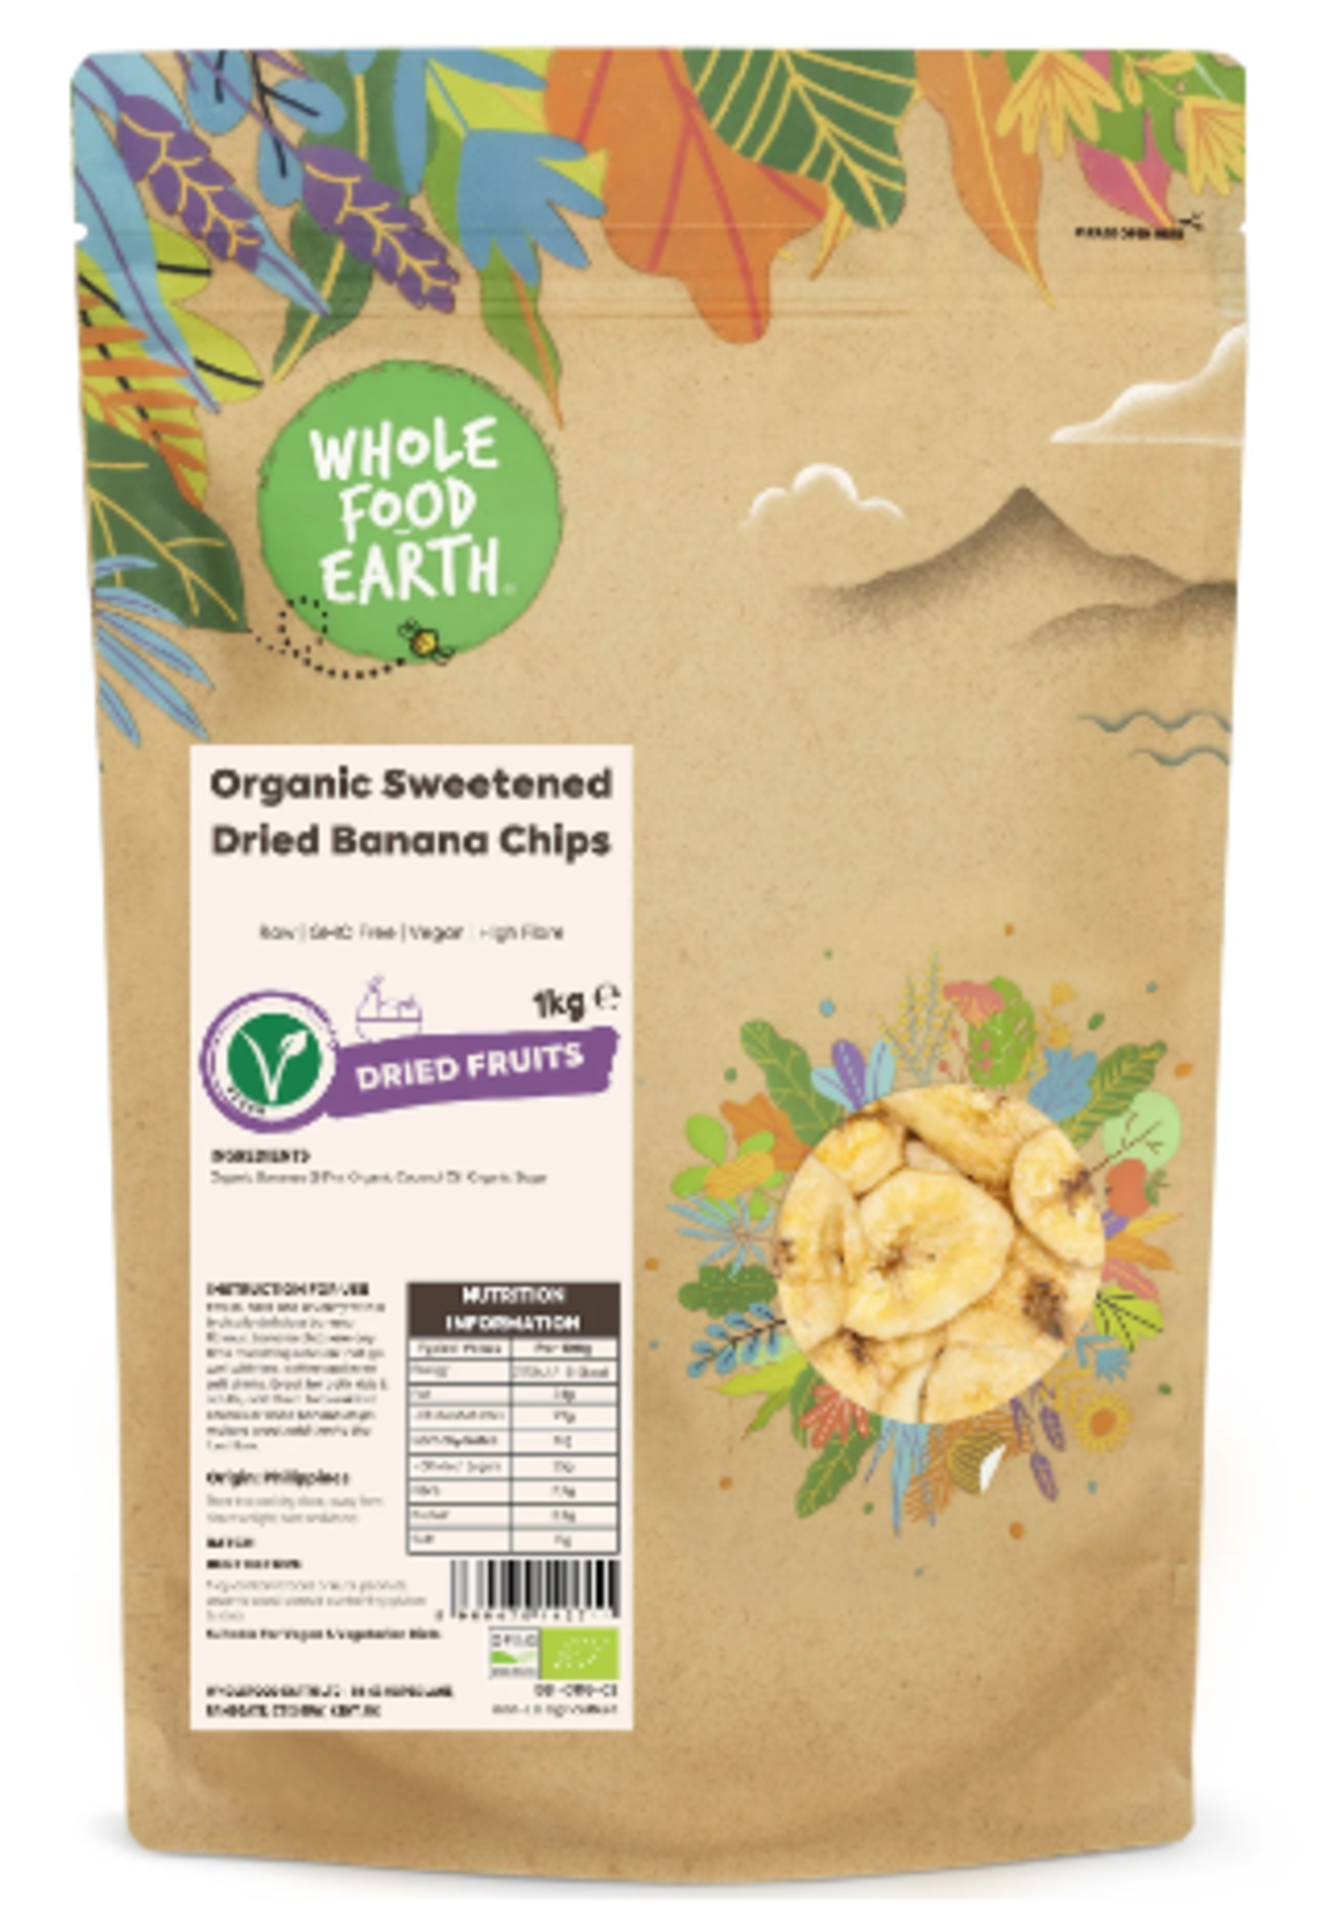 **RRP £1139 (Approx. Count 82) (E36) spSBG21fXtk 23 x Wholefood Earth Organic Sweetened Dried Banana - Image 3 of 3